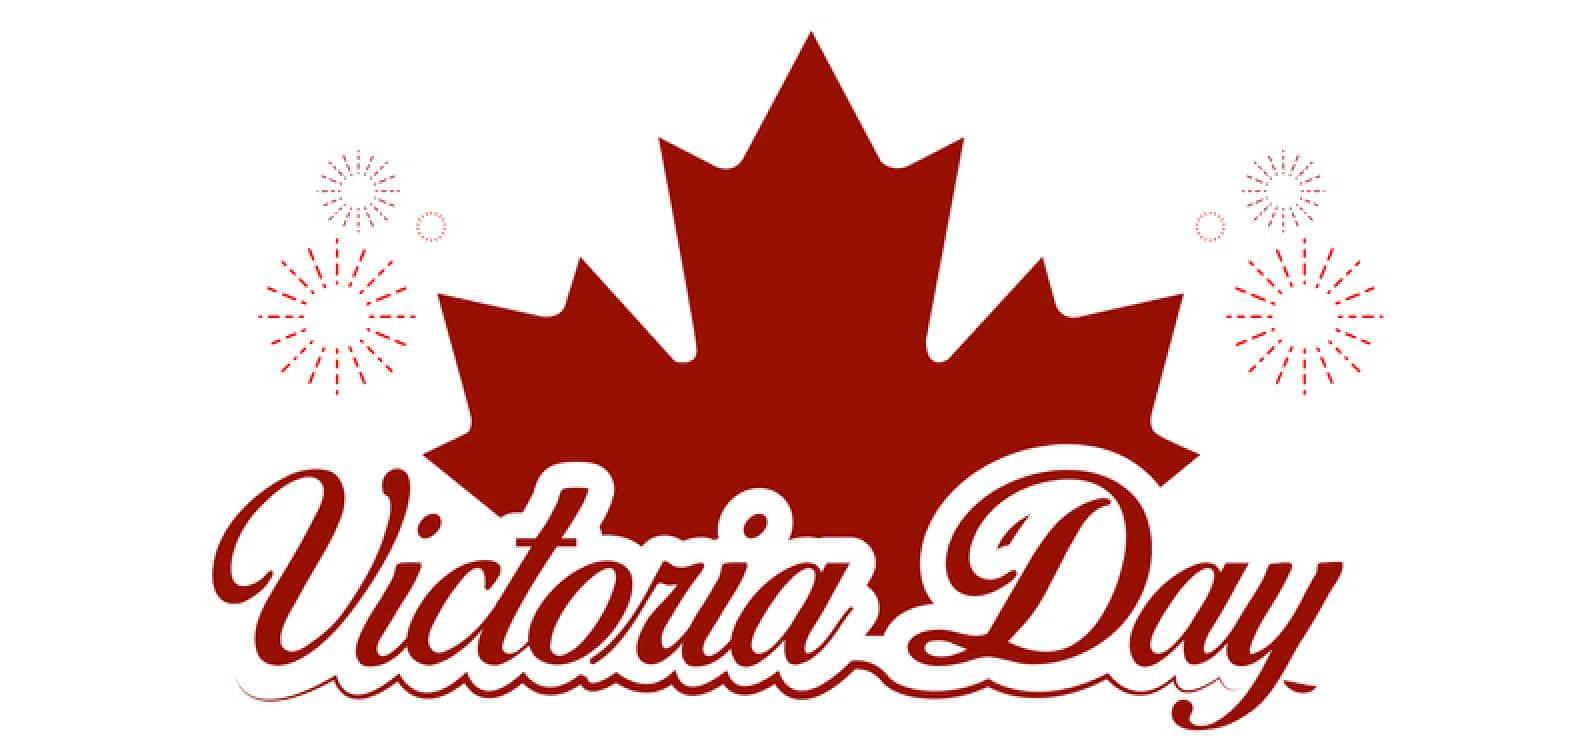 An image of a red maple leaf with the words "Victoria Day" written in cursive writing along the bottom of the lead. Red firework bursts are shown on both sides of the maple leaf to add dimension to the image.